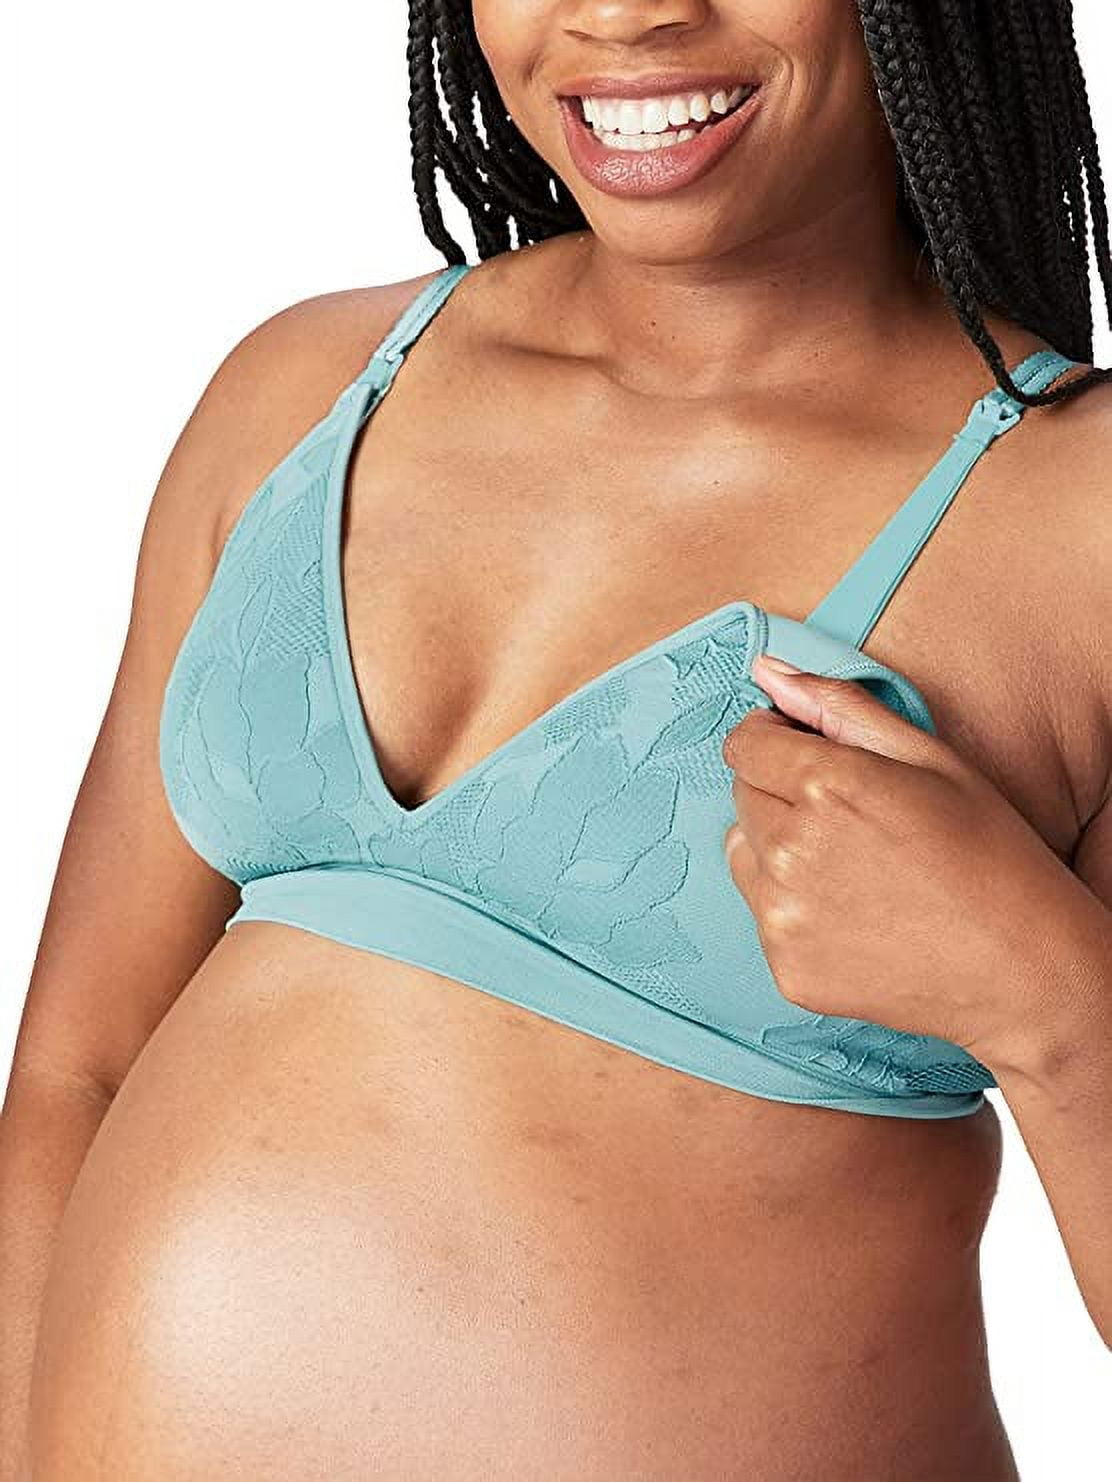 Colace While Pregnant Reviewwire-free Nursing Bra For Pregnancy -  Adjustable Cotton Maternity Bra